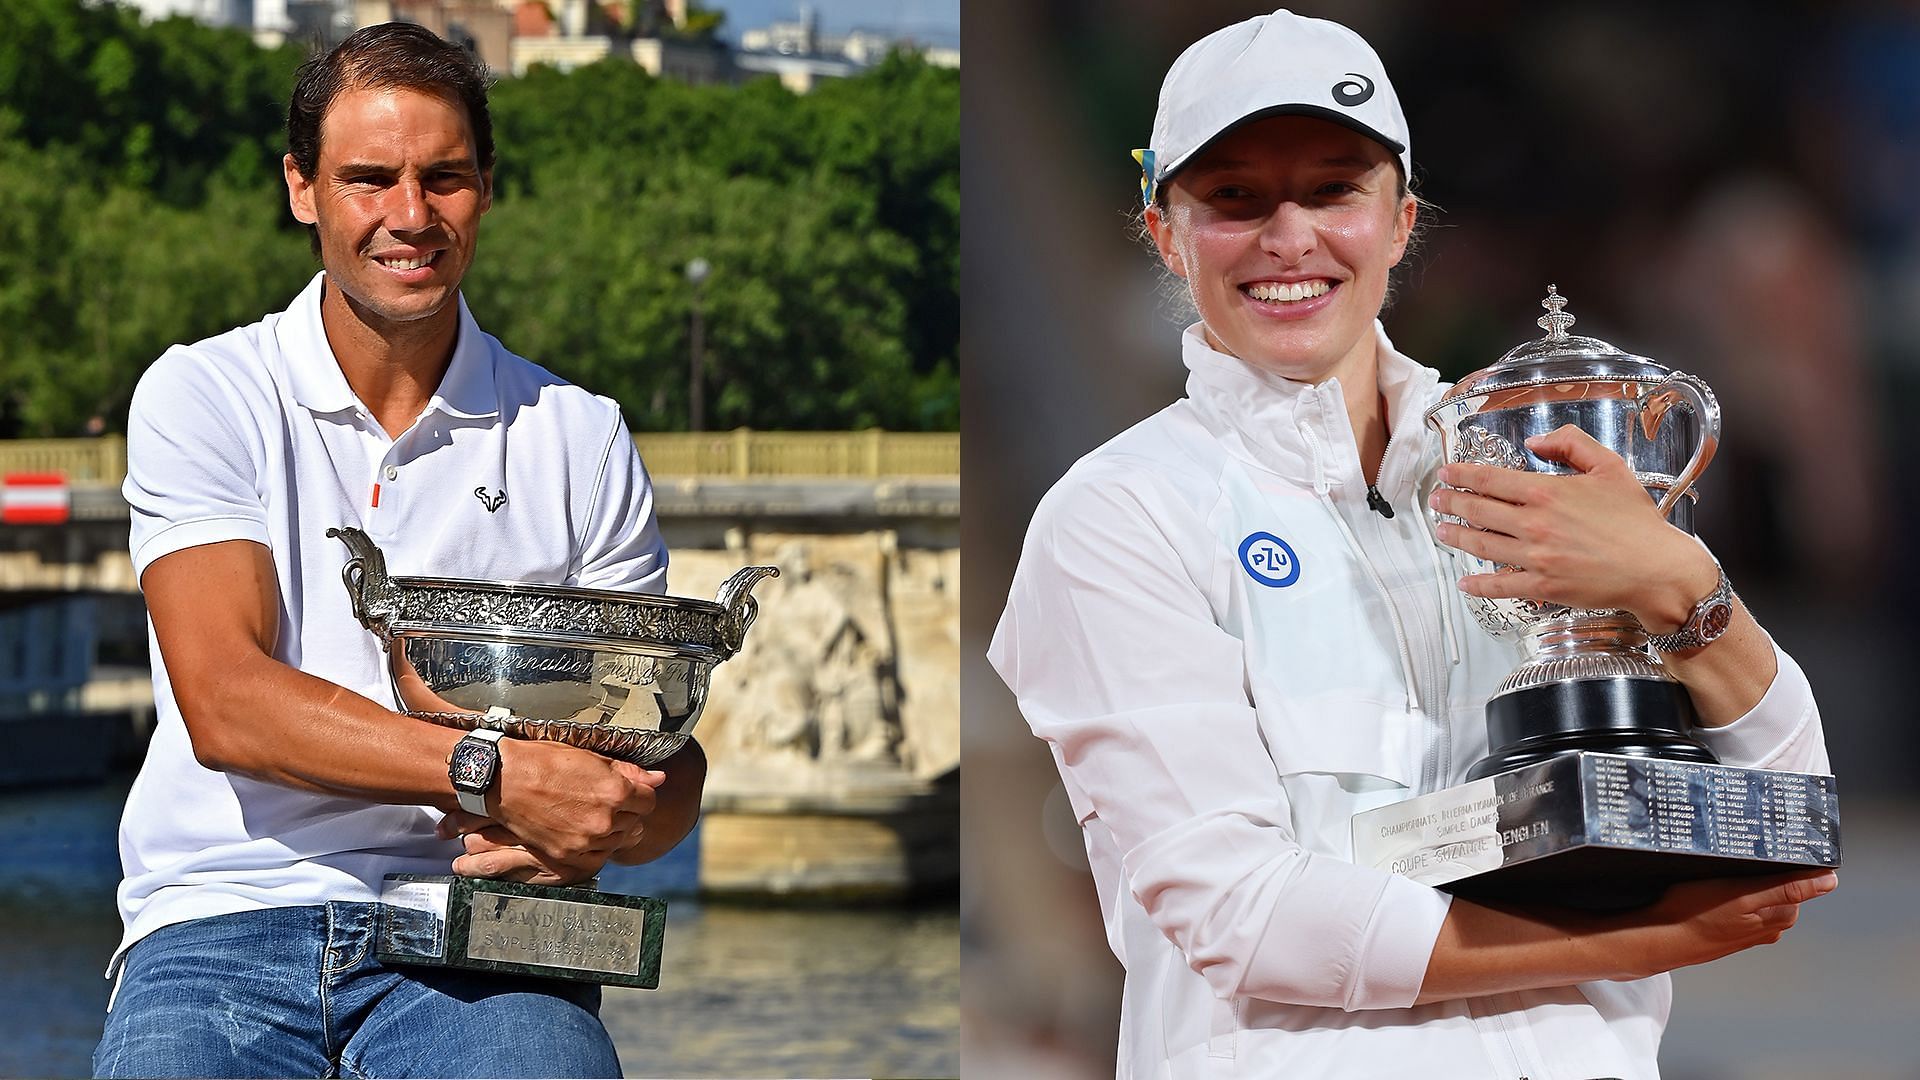 Rafael Nadal and Iga Swiatek are the defending champions at the 2023 French Open.